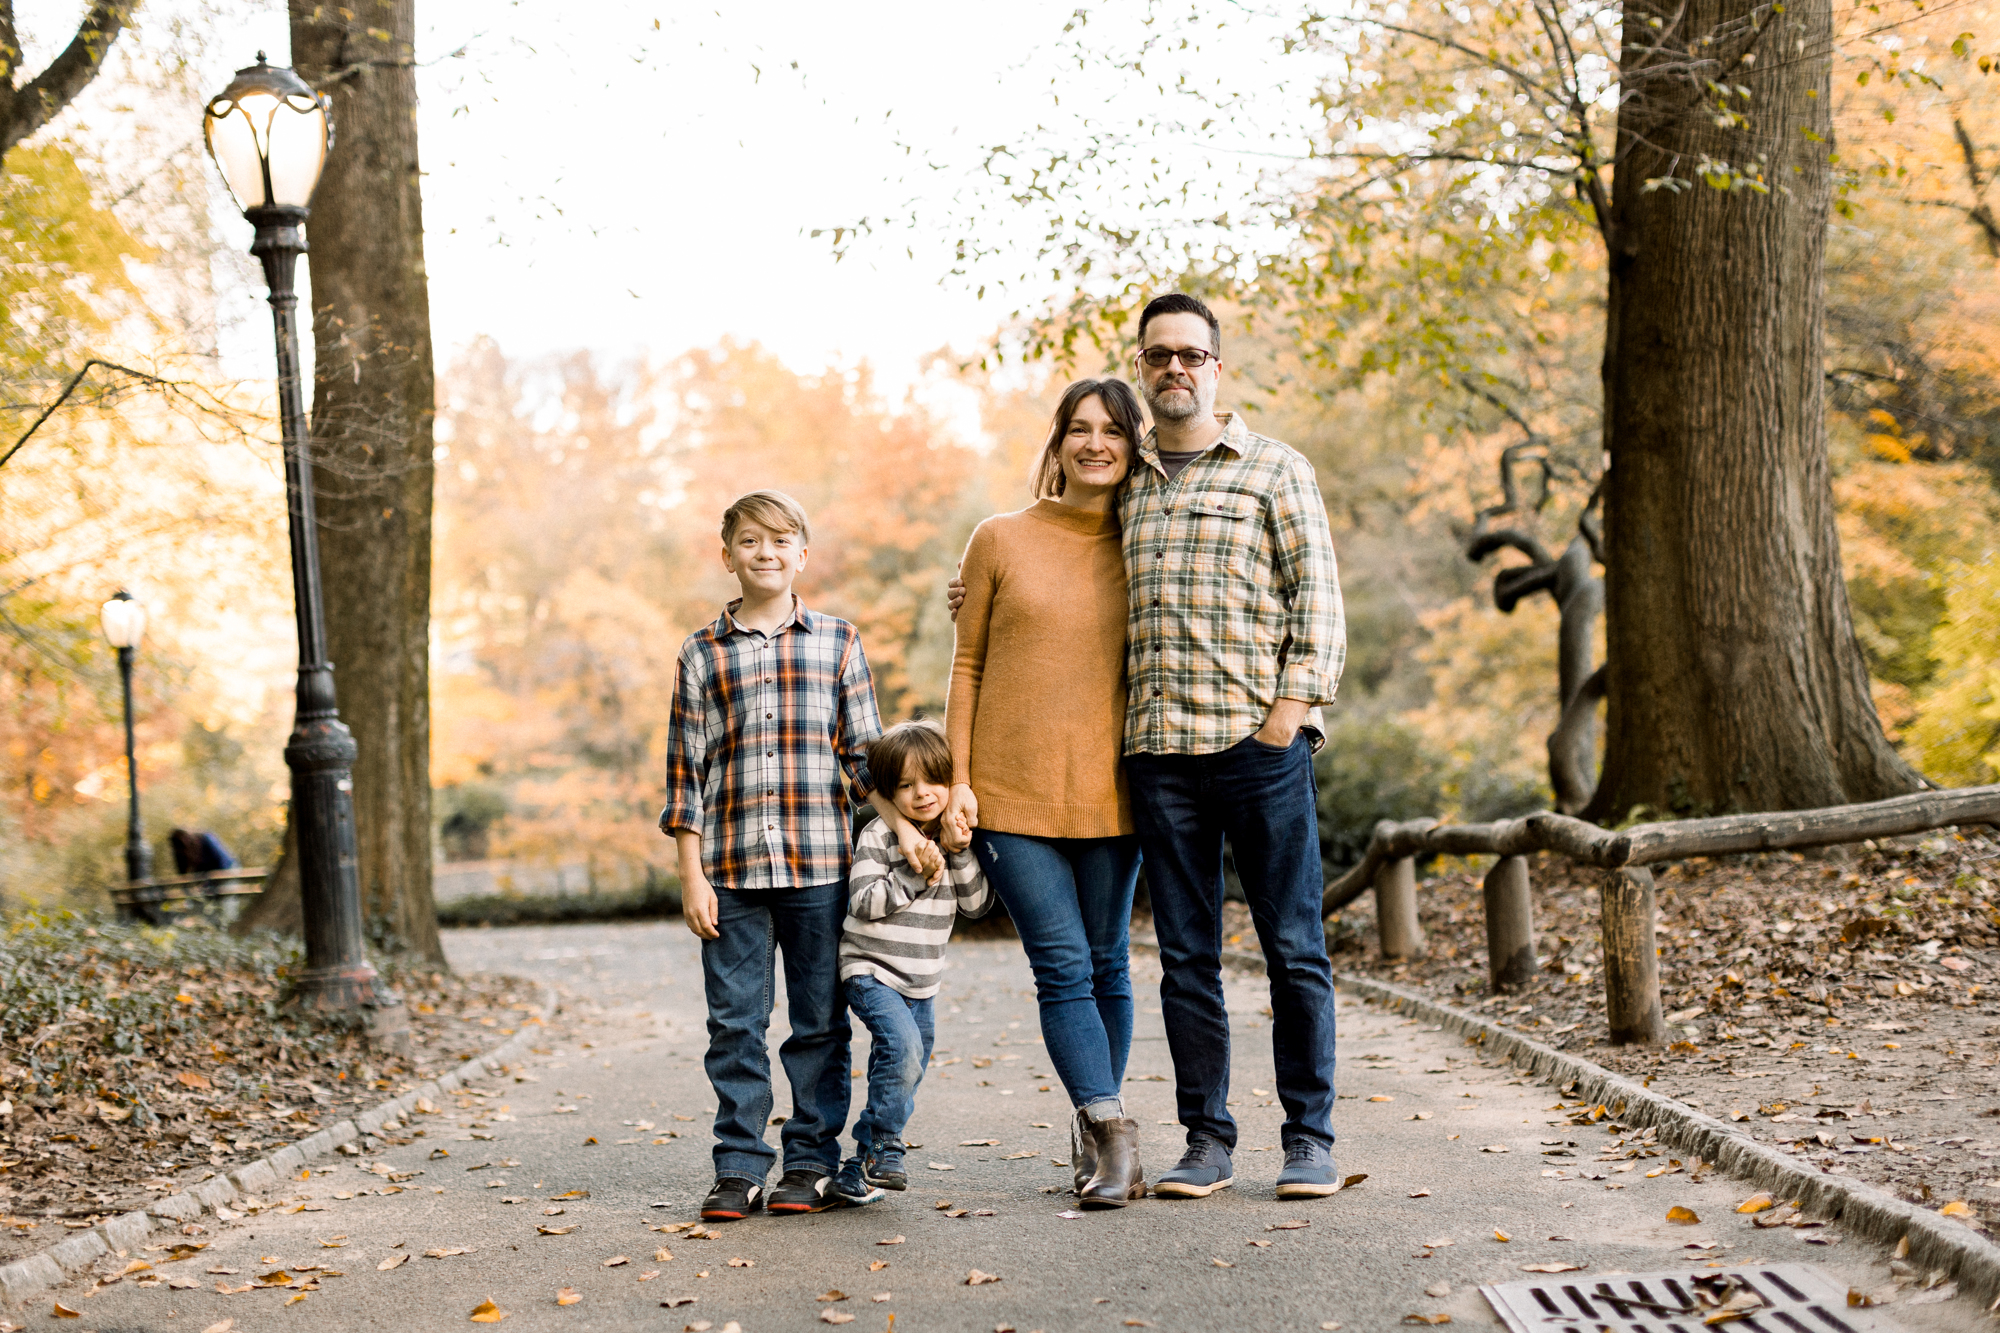 Pretty Central Park Family Photos in New York